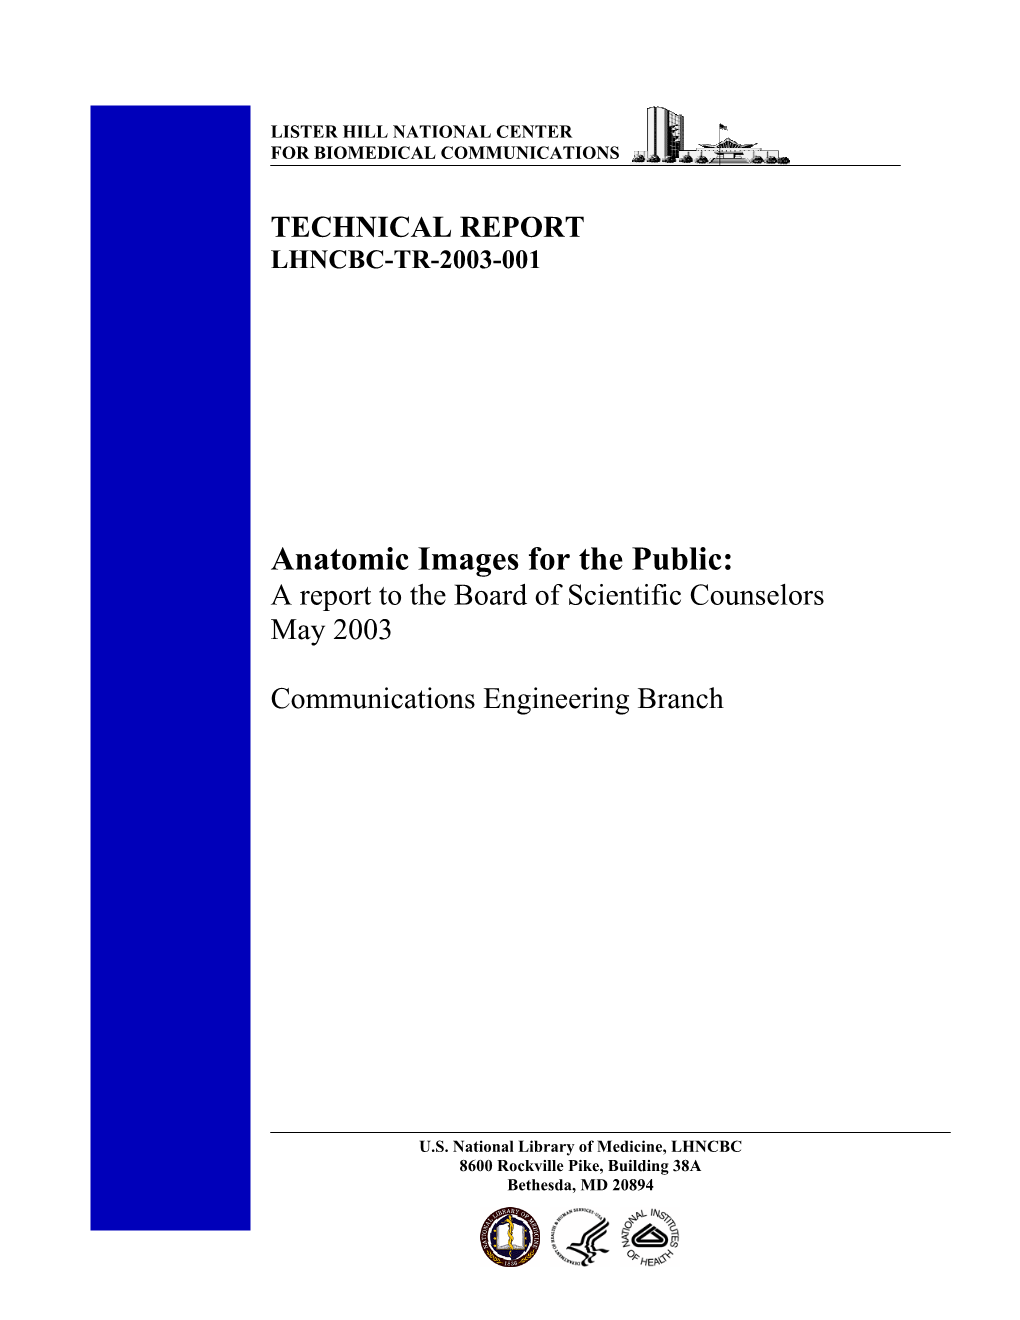 Anatomic Images for the Public: a Report to the Board of Scientific Counselors May 2003